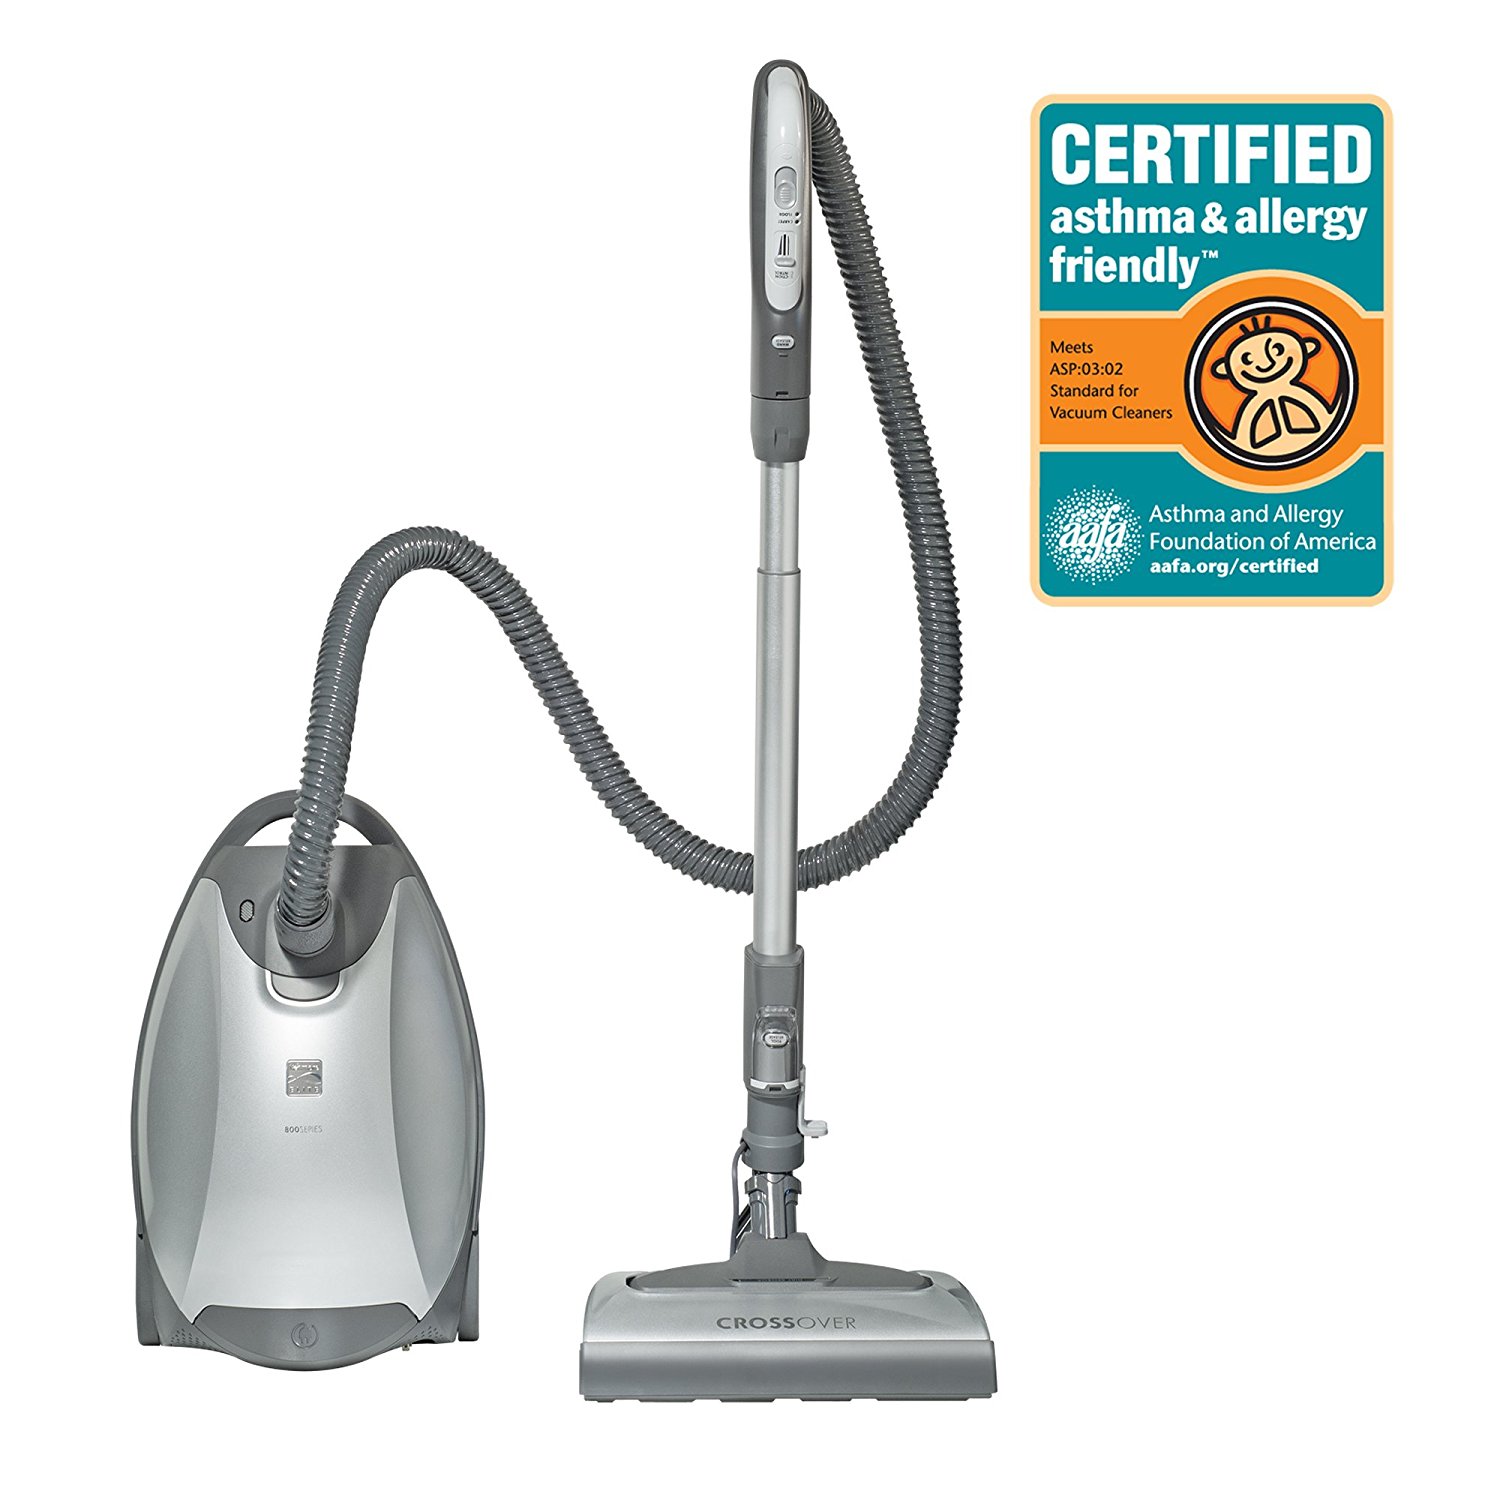 Kenmore Elite 21814 Pet Friendly CrossOver Canister Vacuum in Silver/Gray